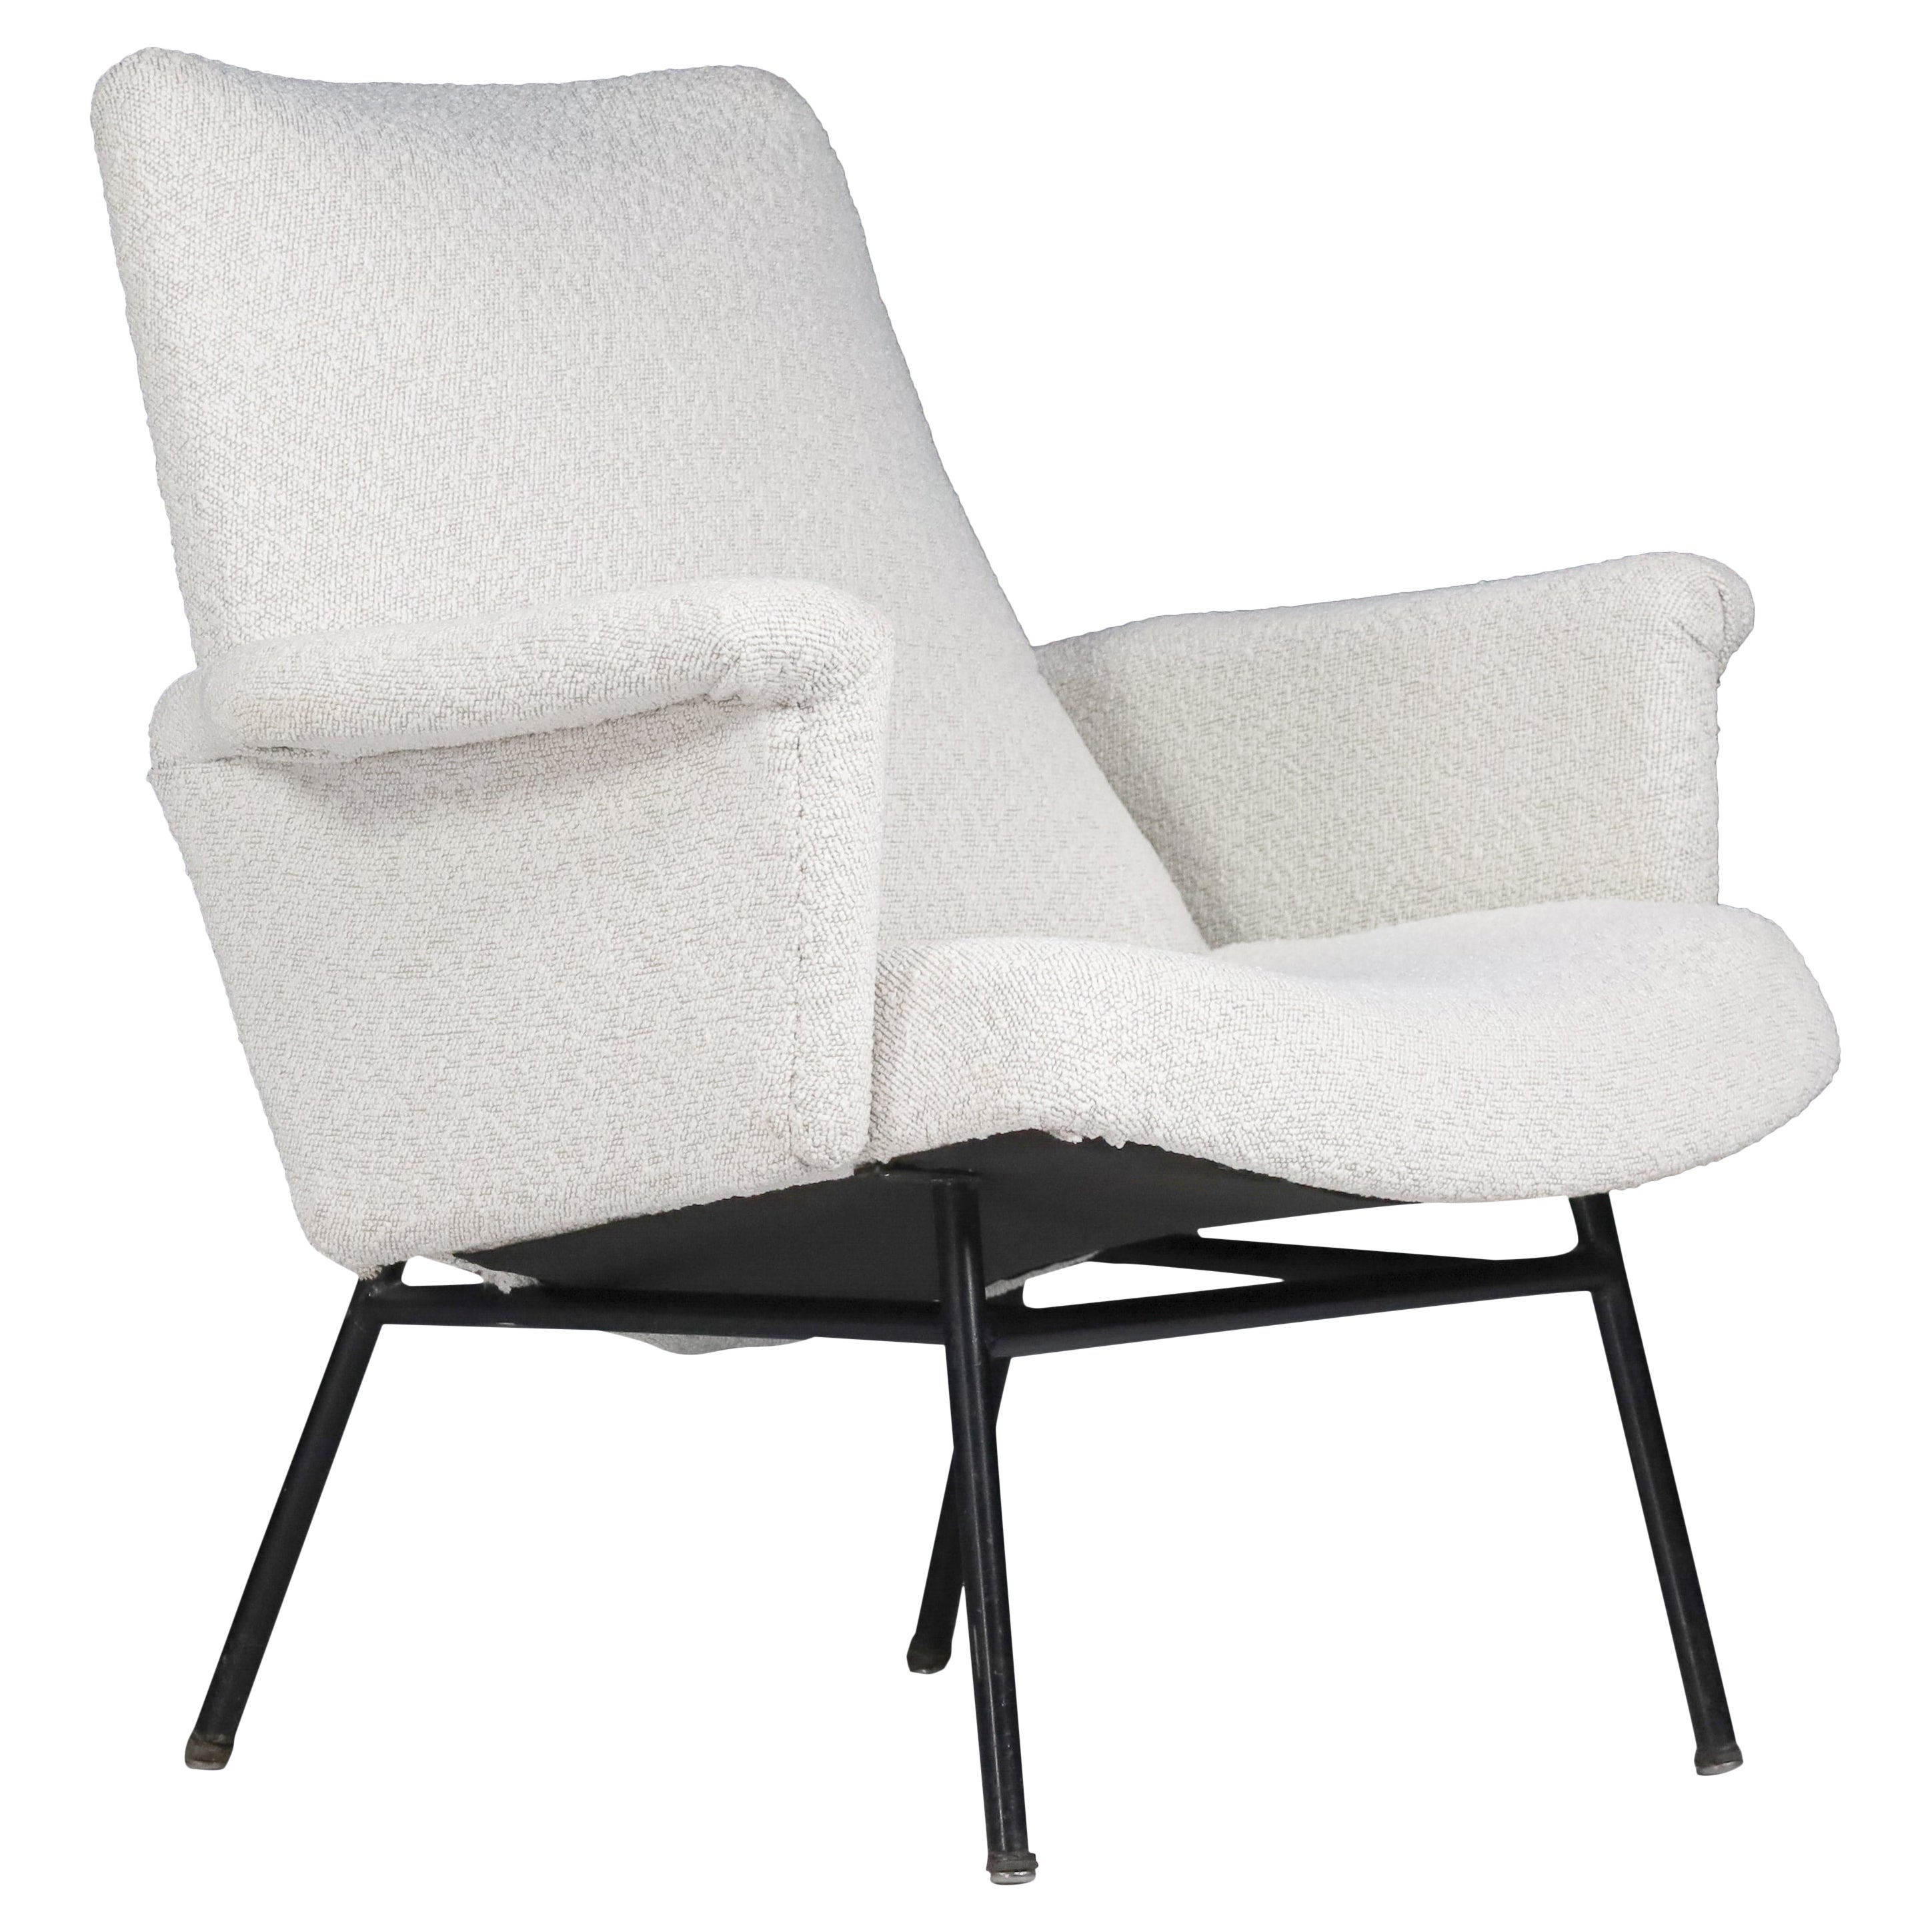 Mid-20th SK660 Armchair by Pierre Guariche in New Bouclé Upholstery France, 1953